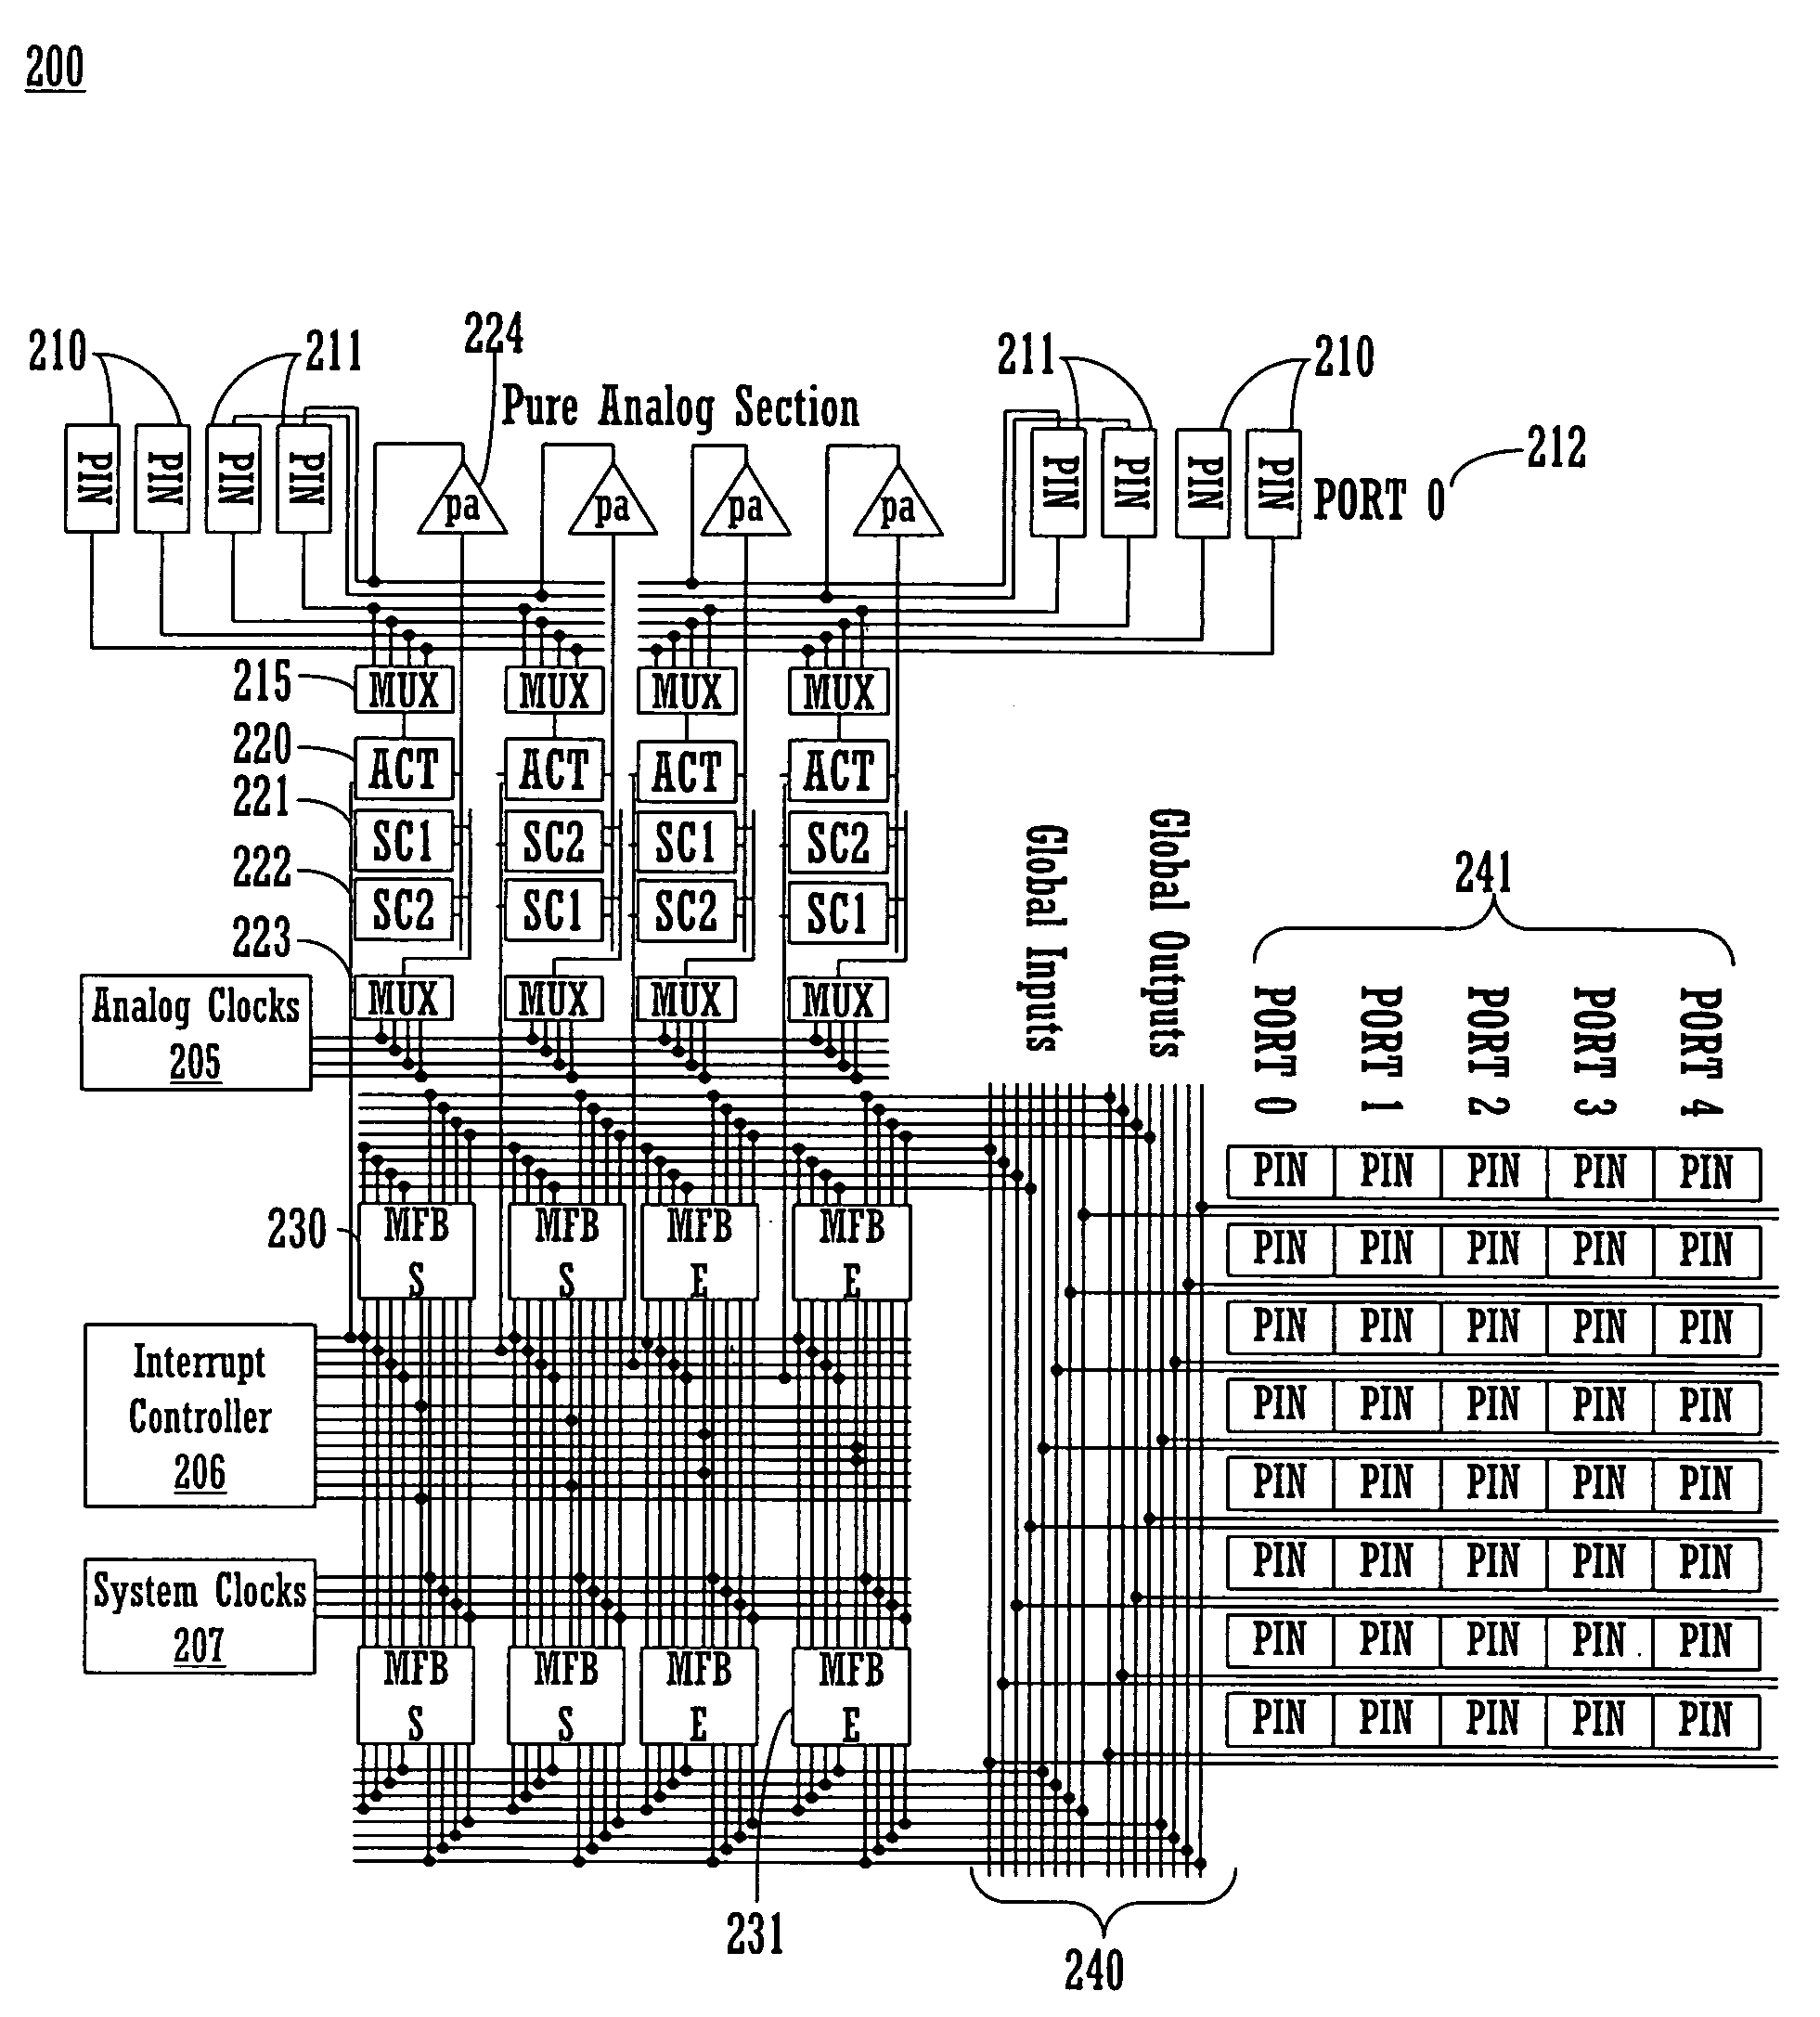 Programmable microcontroller architecture (mixed analog/digital)